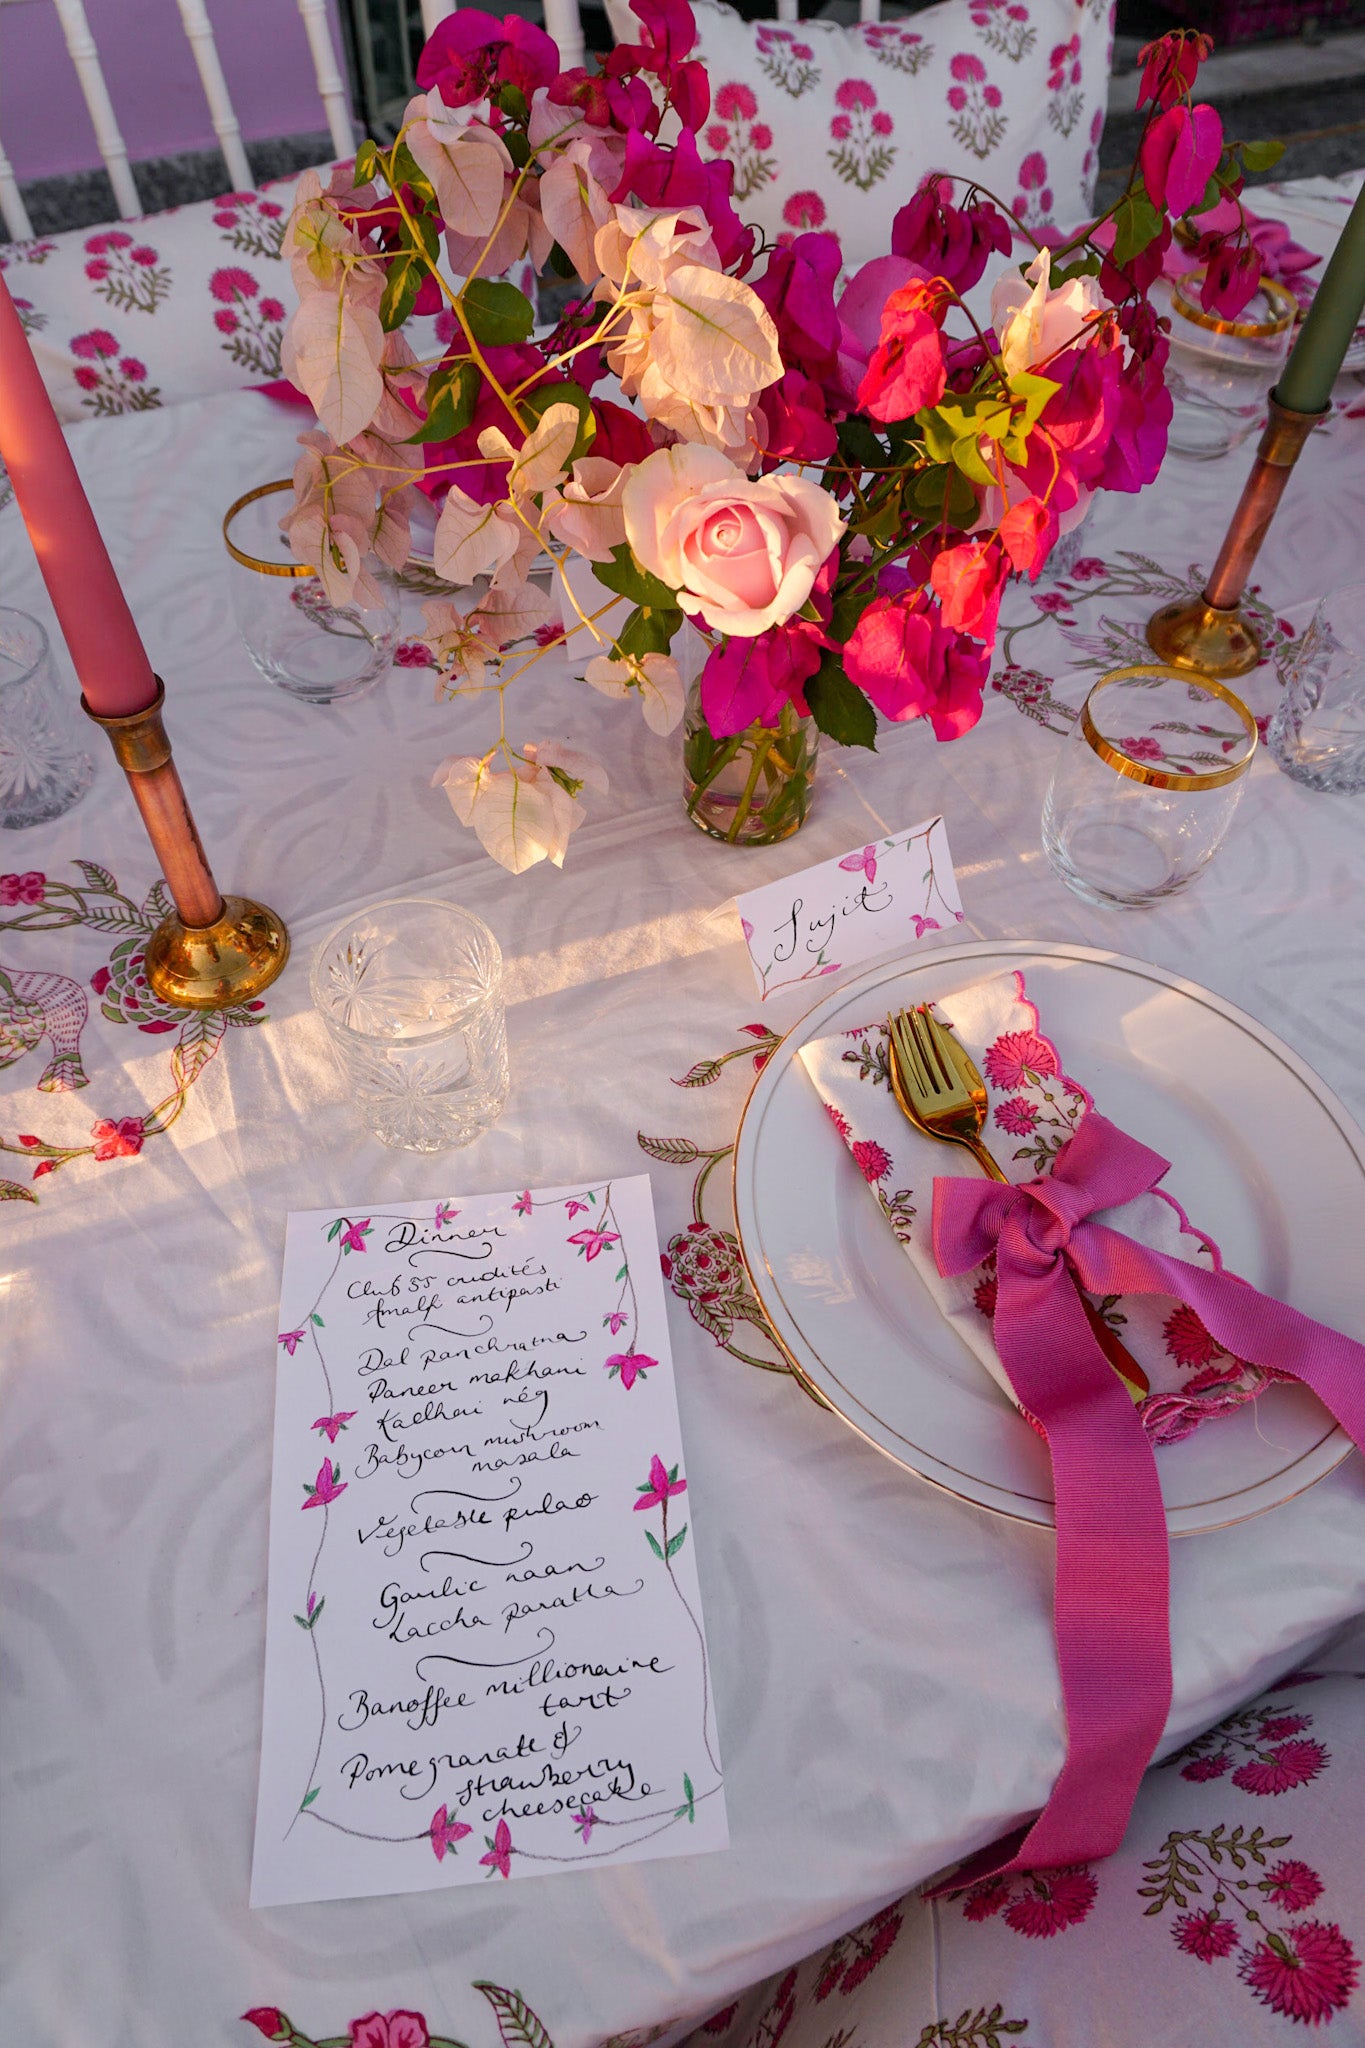 Menu and table details by Rosanna Falconer